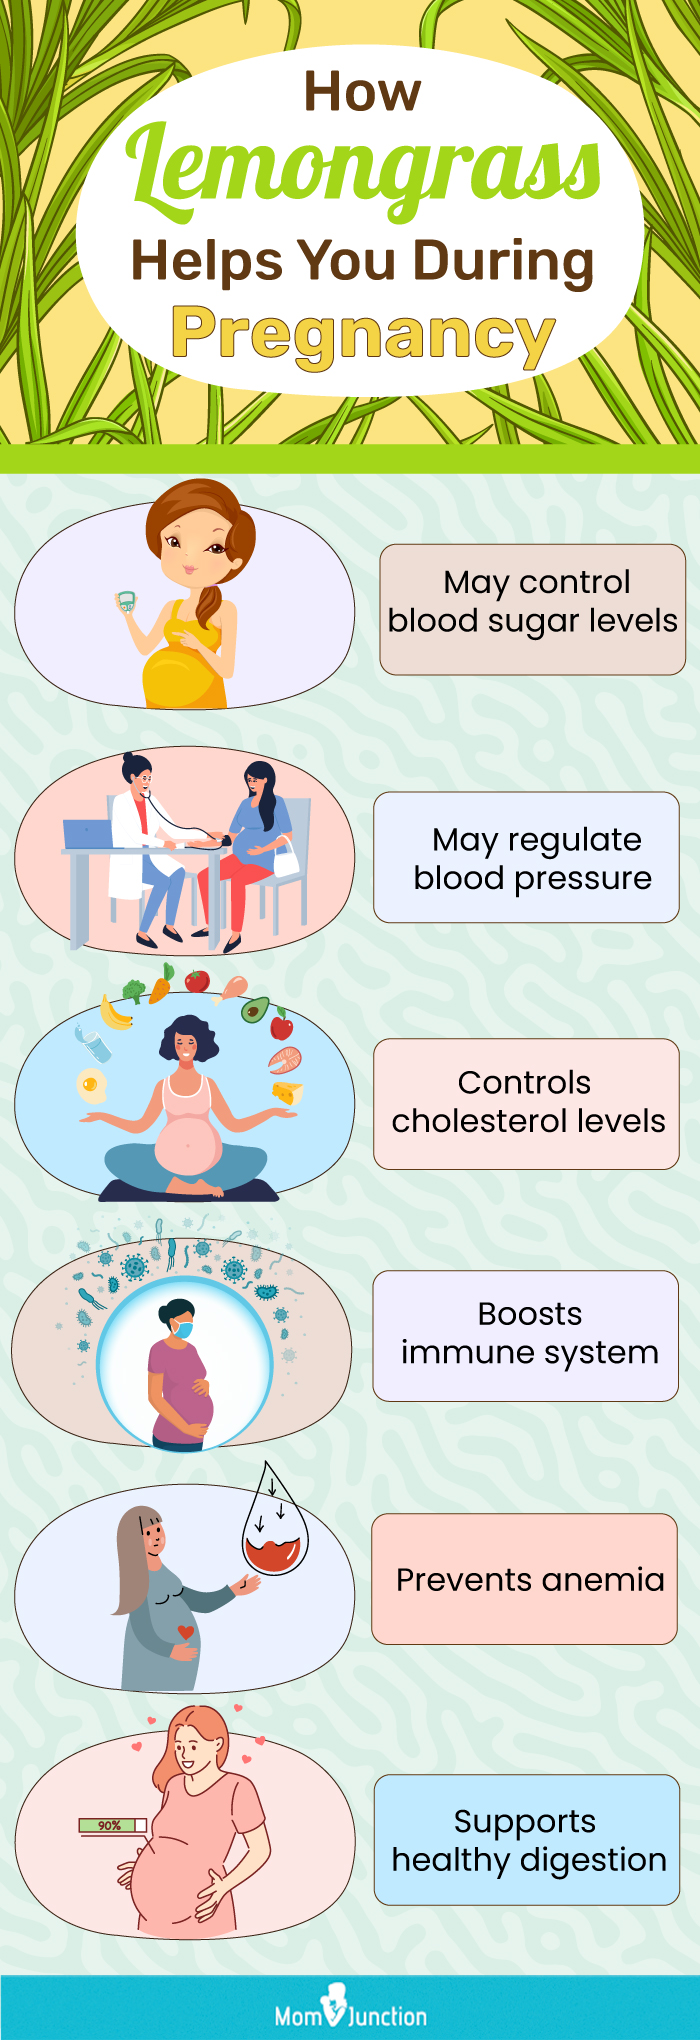 Tips For Menstrual Cramp Relief Infographic Concept Home Remedies Or Useful  Advice For Period Pain Relief Stock Illustration - Download Image Now -  iStock